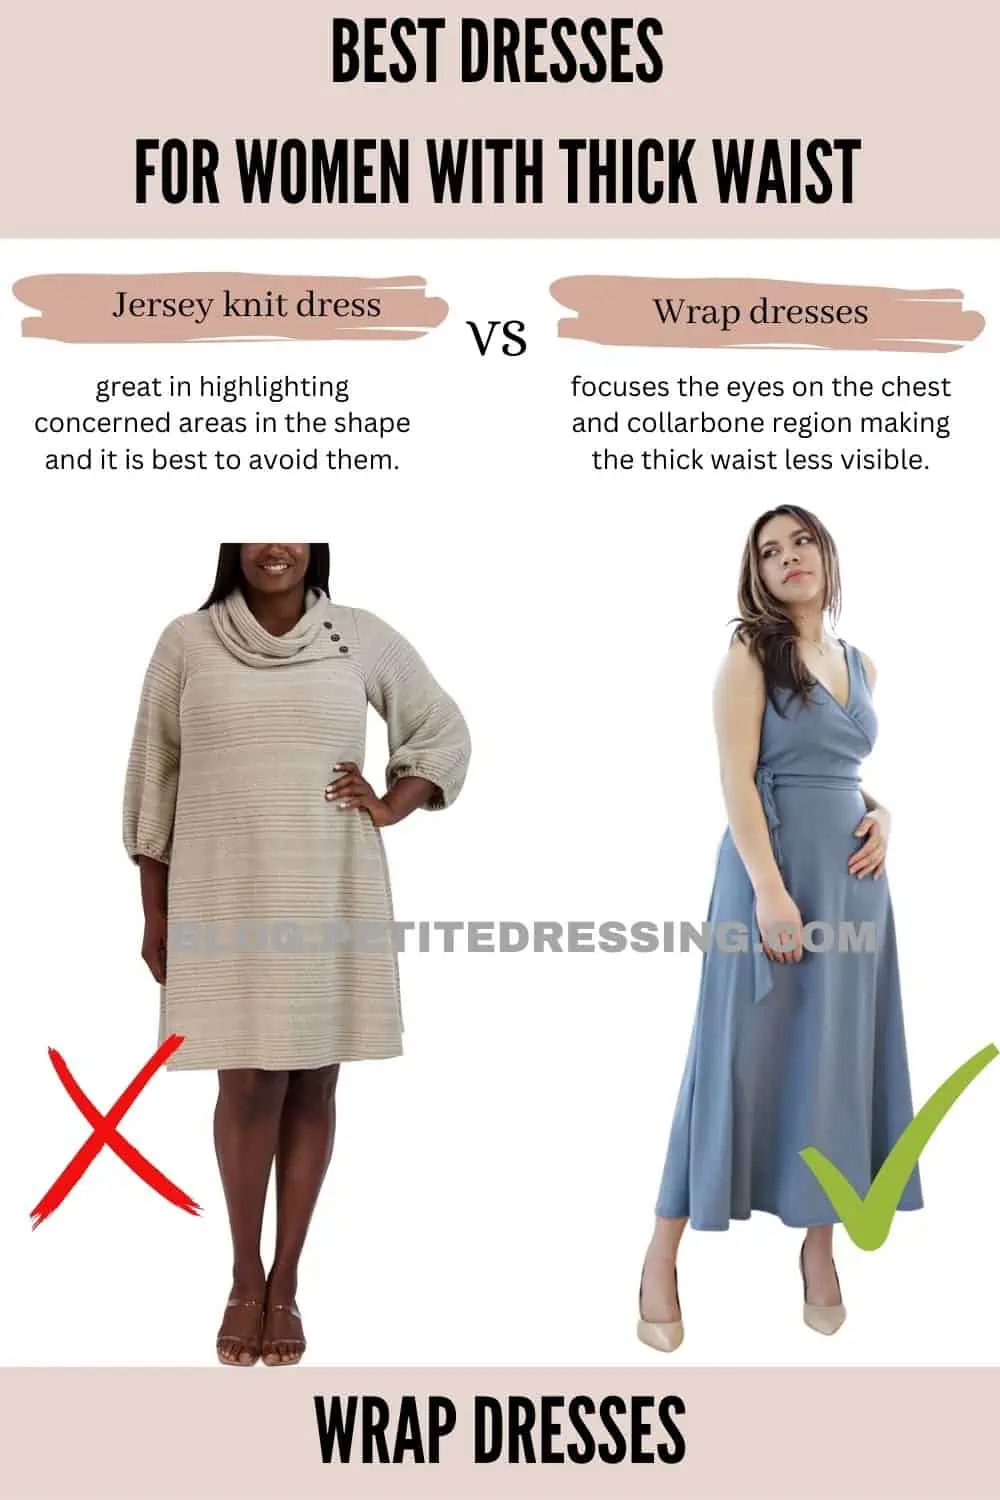 How to Dress if You Have a Thick Waist (The Complete Guide) - Petite  Dressing